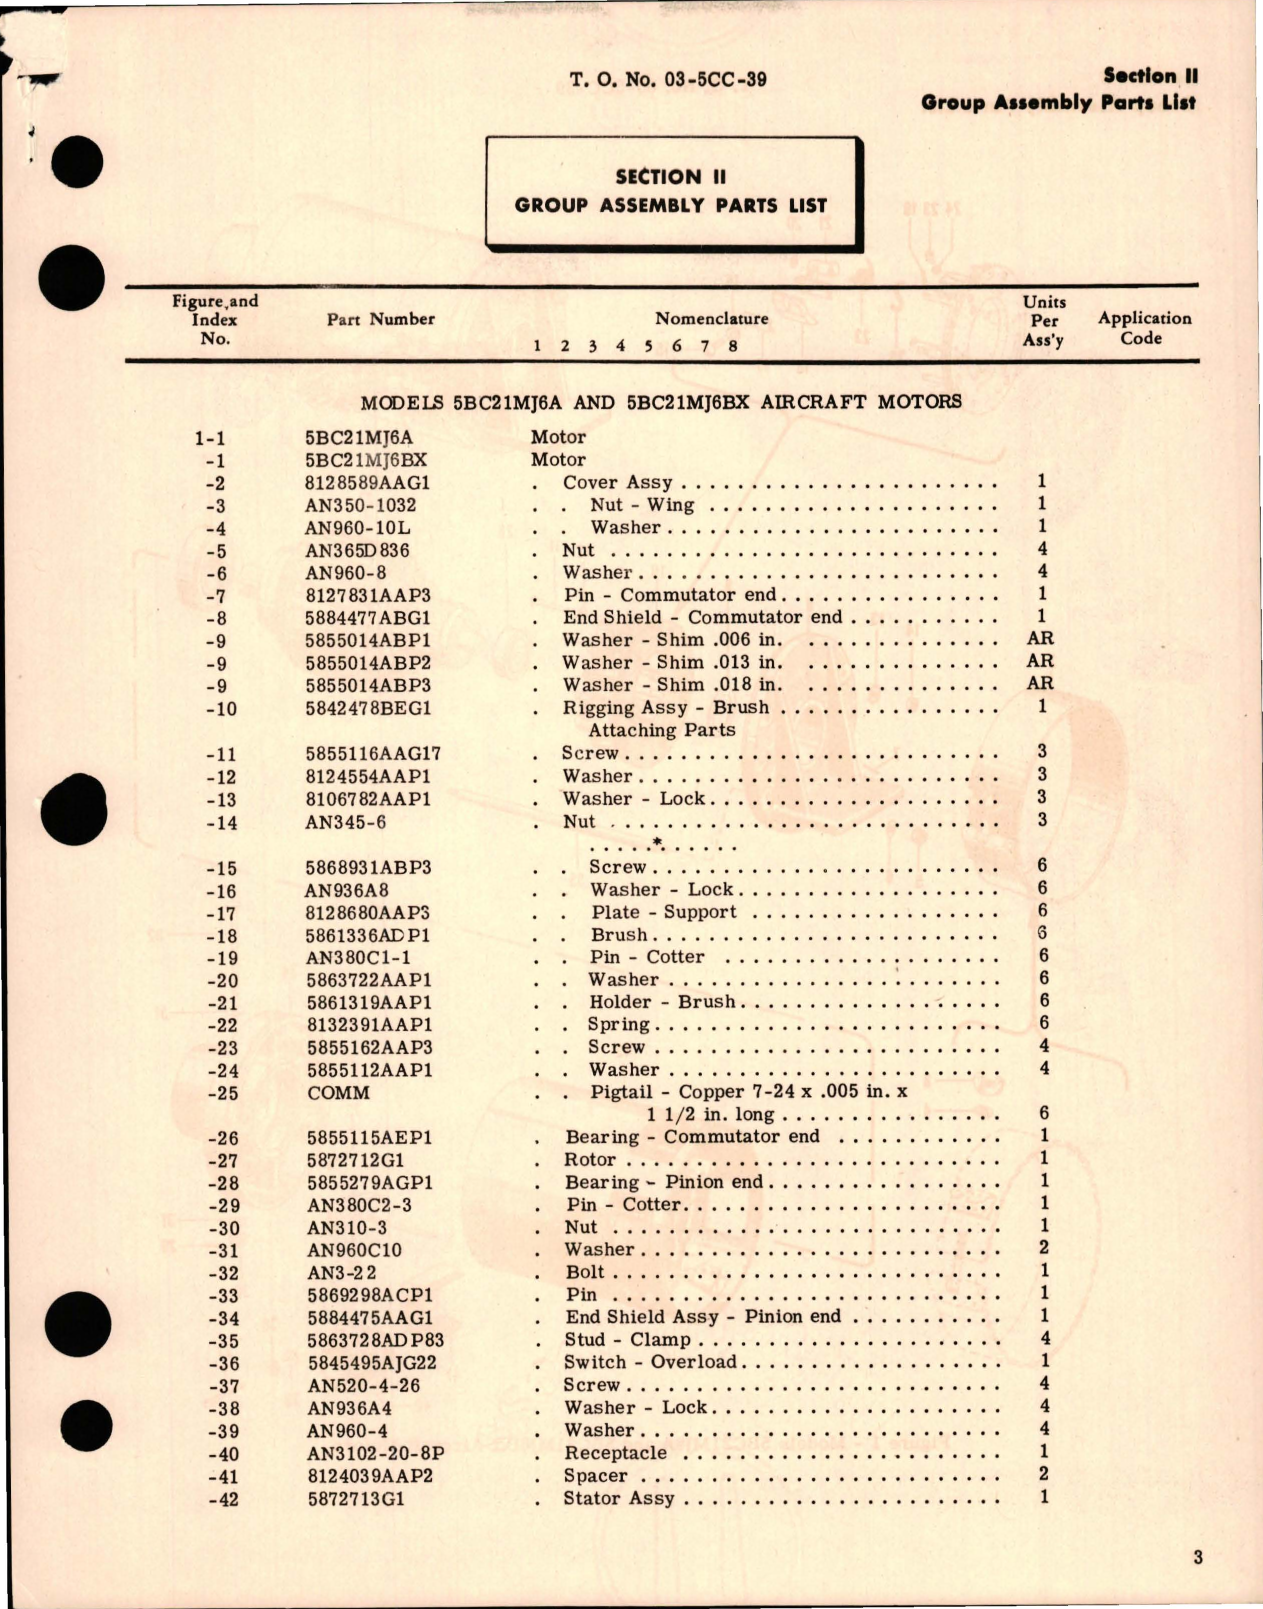 Sample page 5 from AirCorps Library document: Parts Catalog for Aircraft Motors - Series 5BC21 